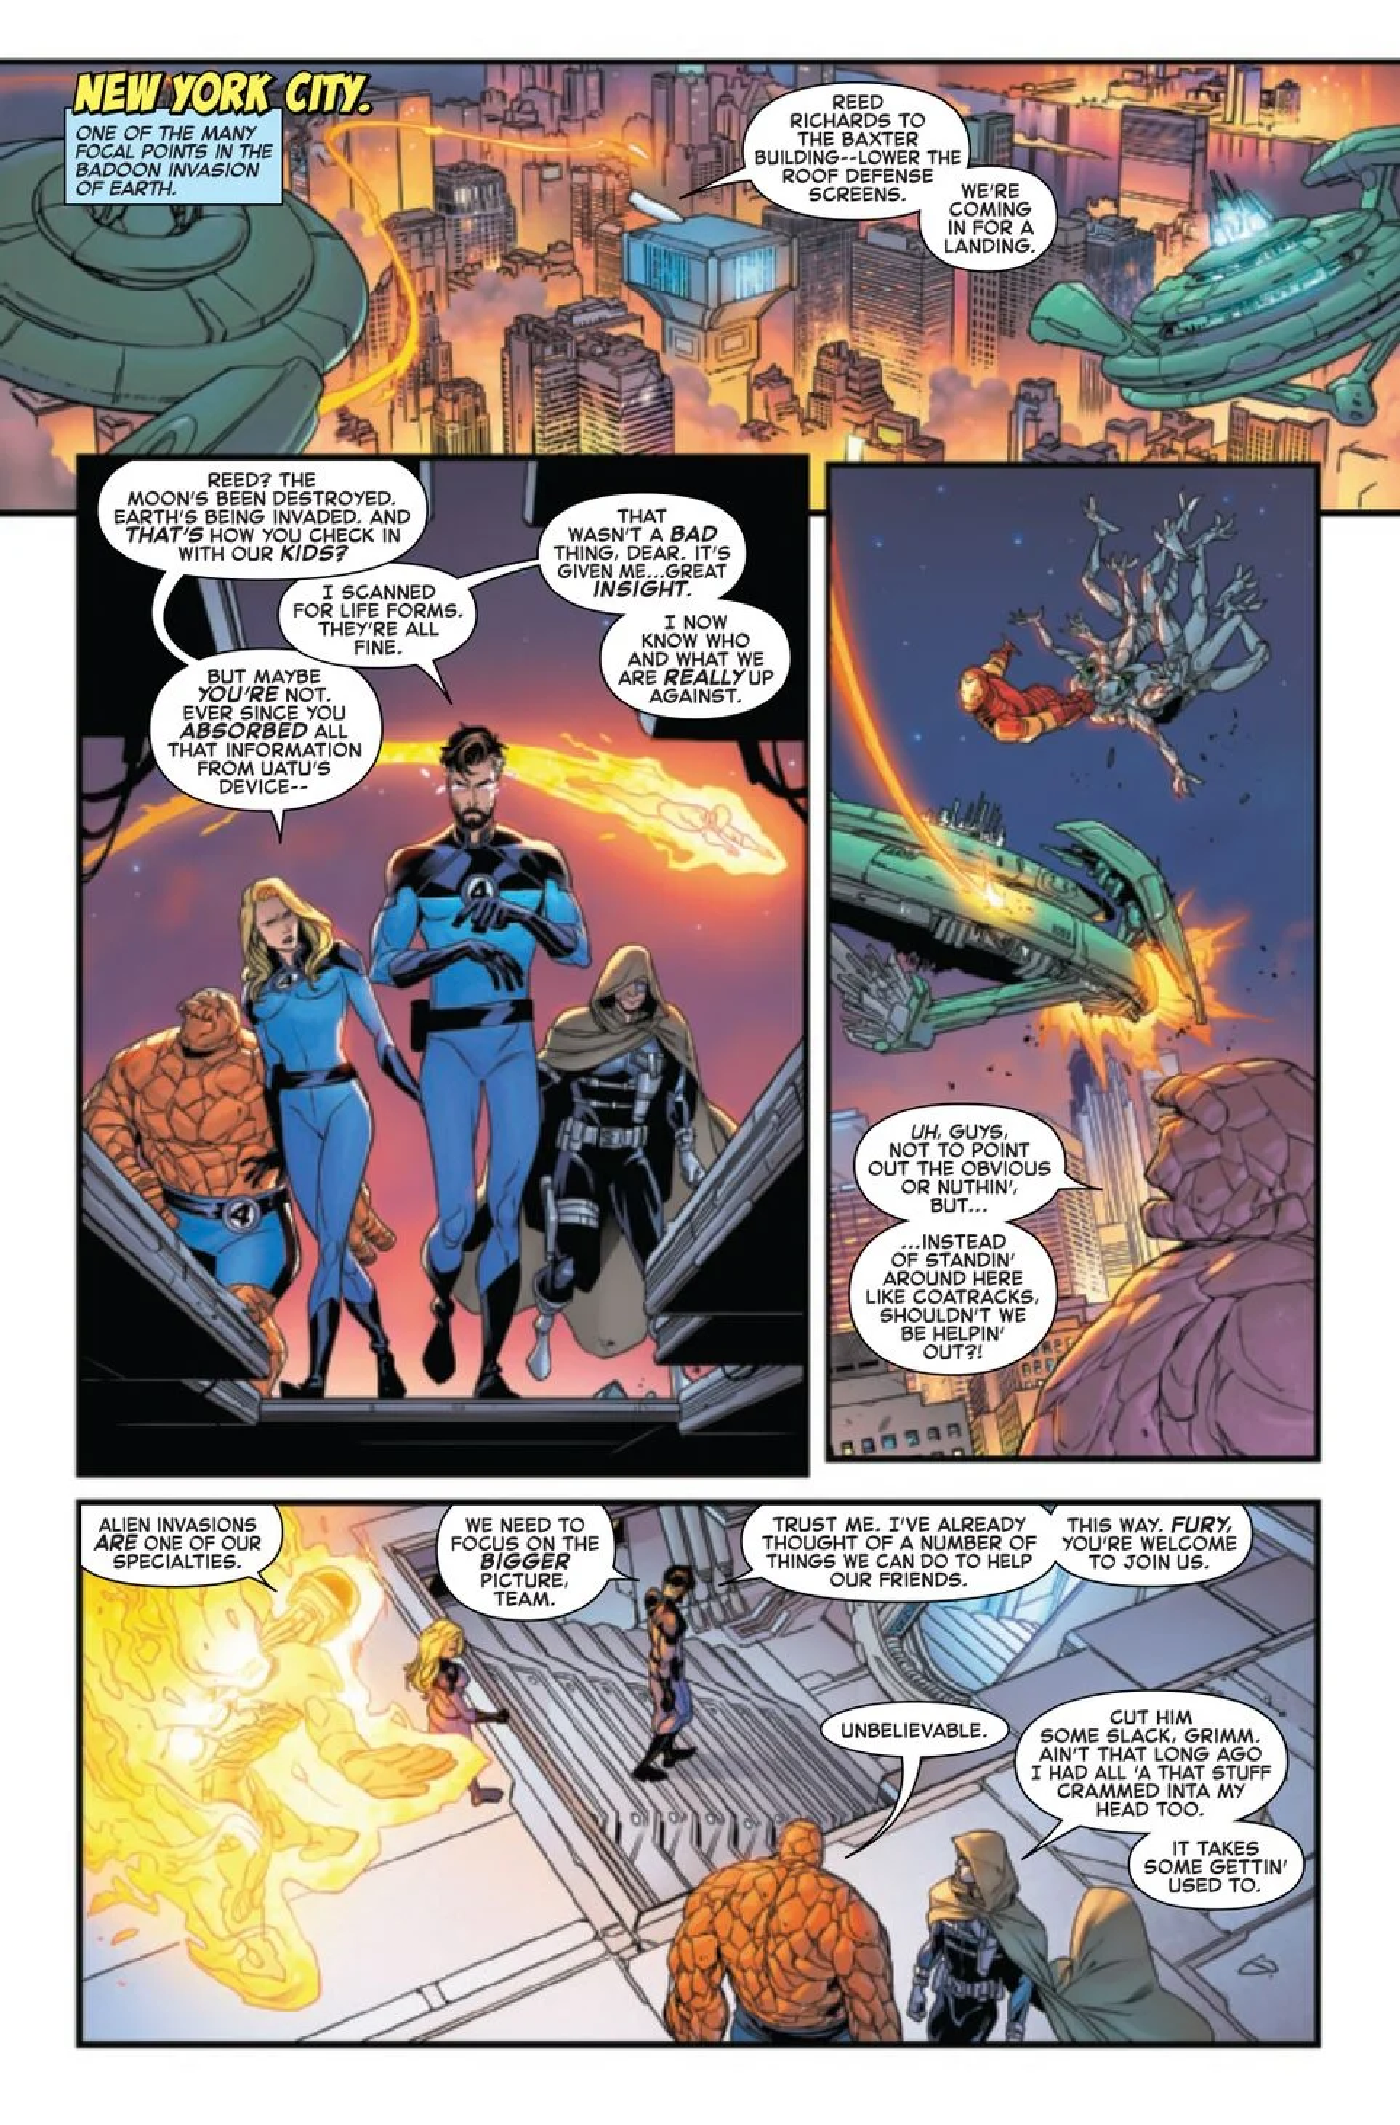 Fantastic Four 40 preview page 3